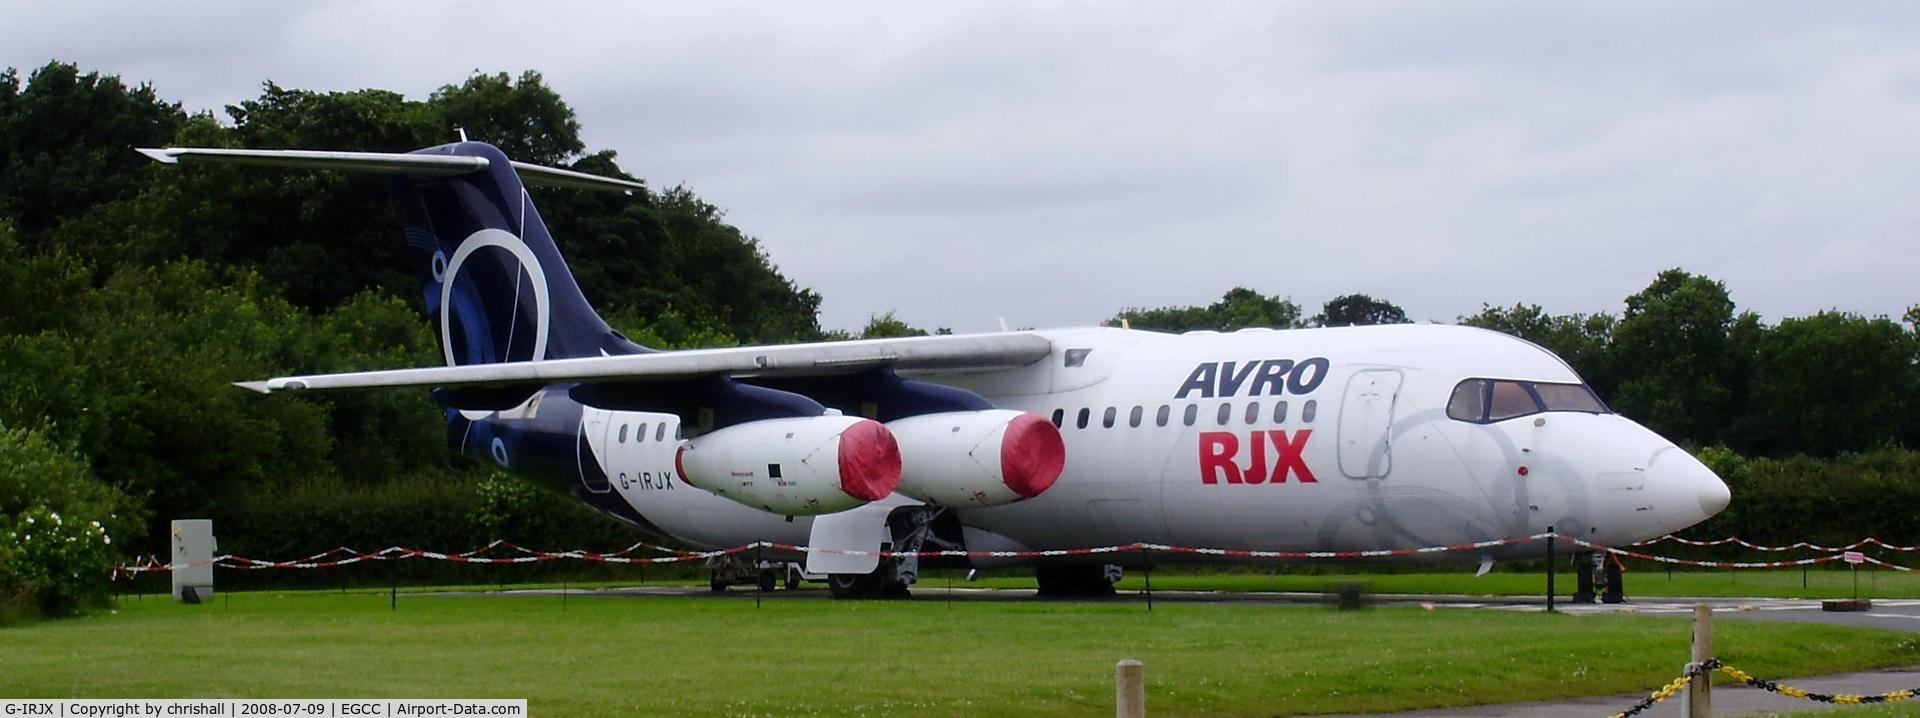 G-IRJX, 2001 British Aerospace Avro 146-RJ100 C/N E3378, on display at the viewing area at Manchester Airport